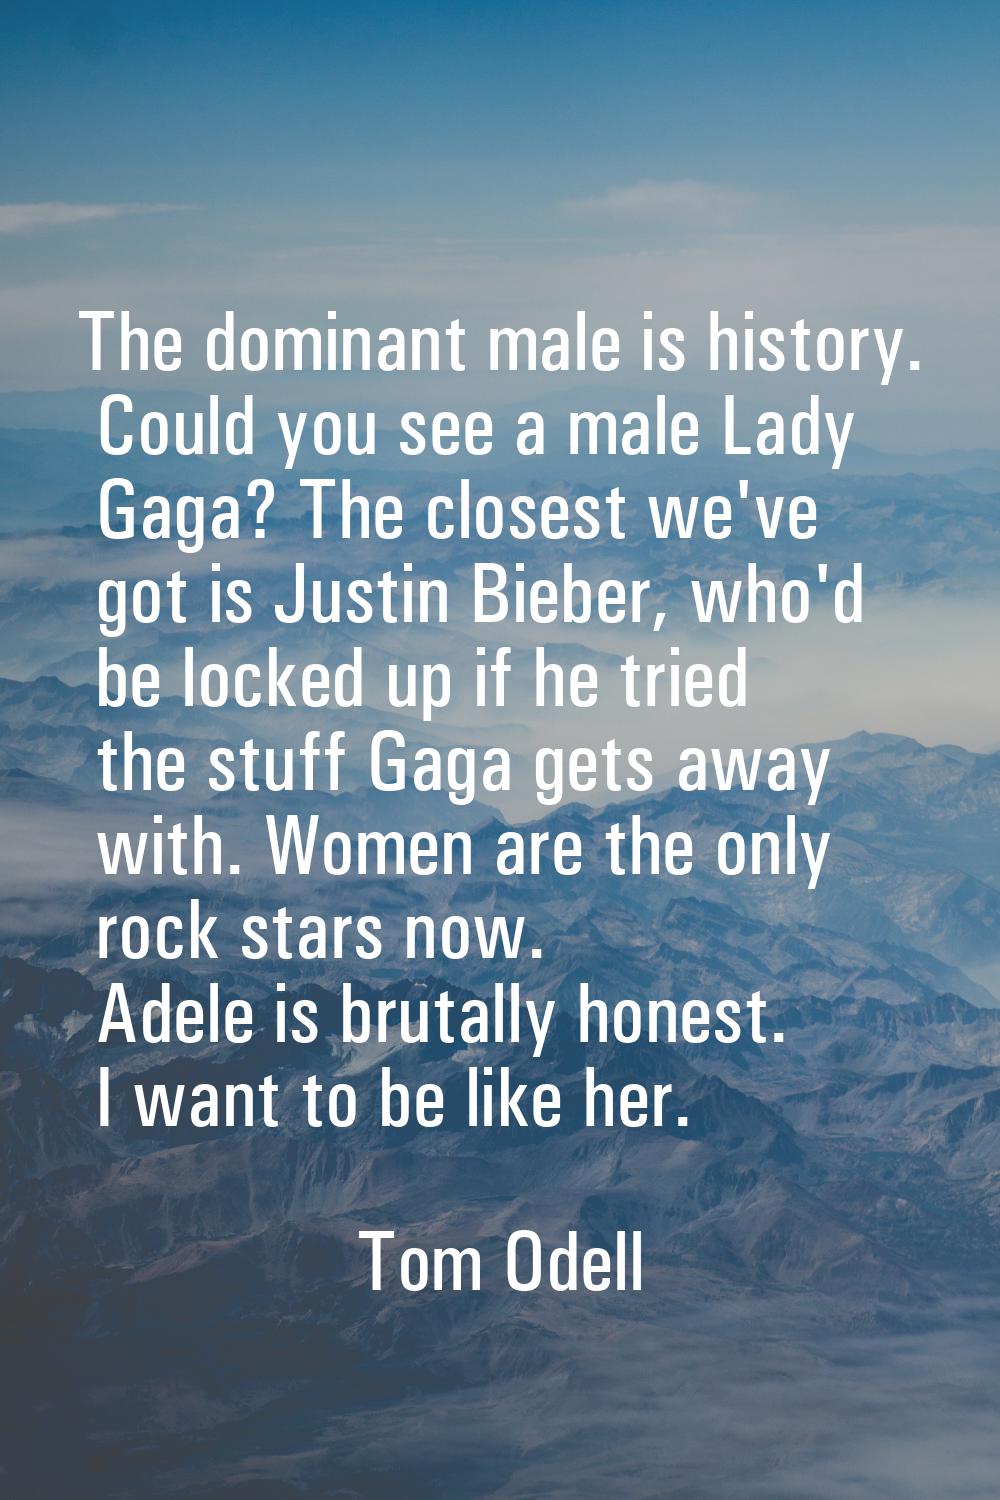 The dominant male is history. Could you see a male Lady Gaga? The closest we've got is Justin Biebe